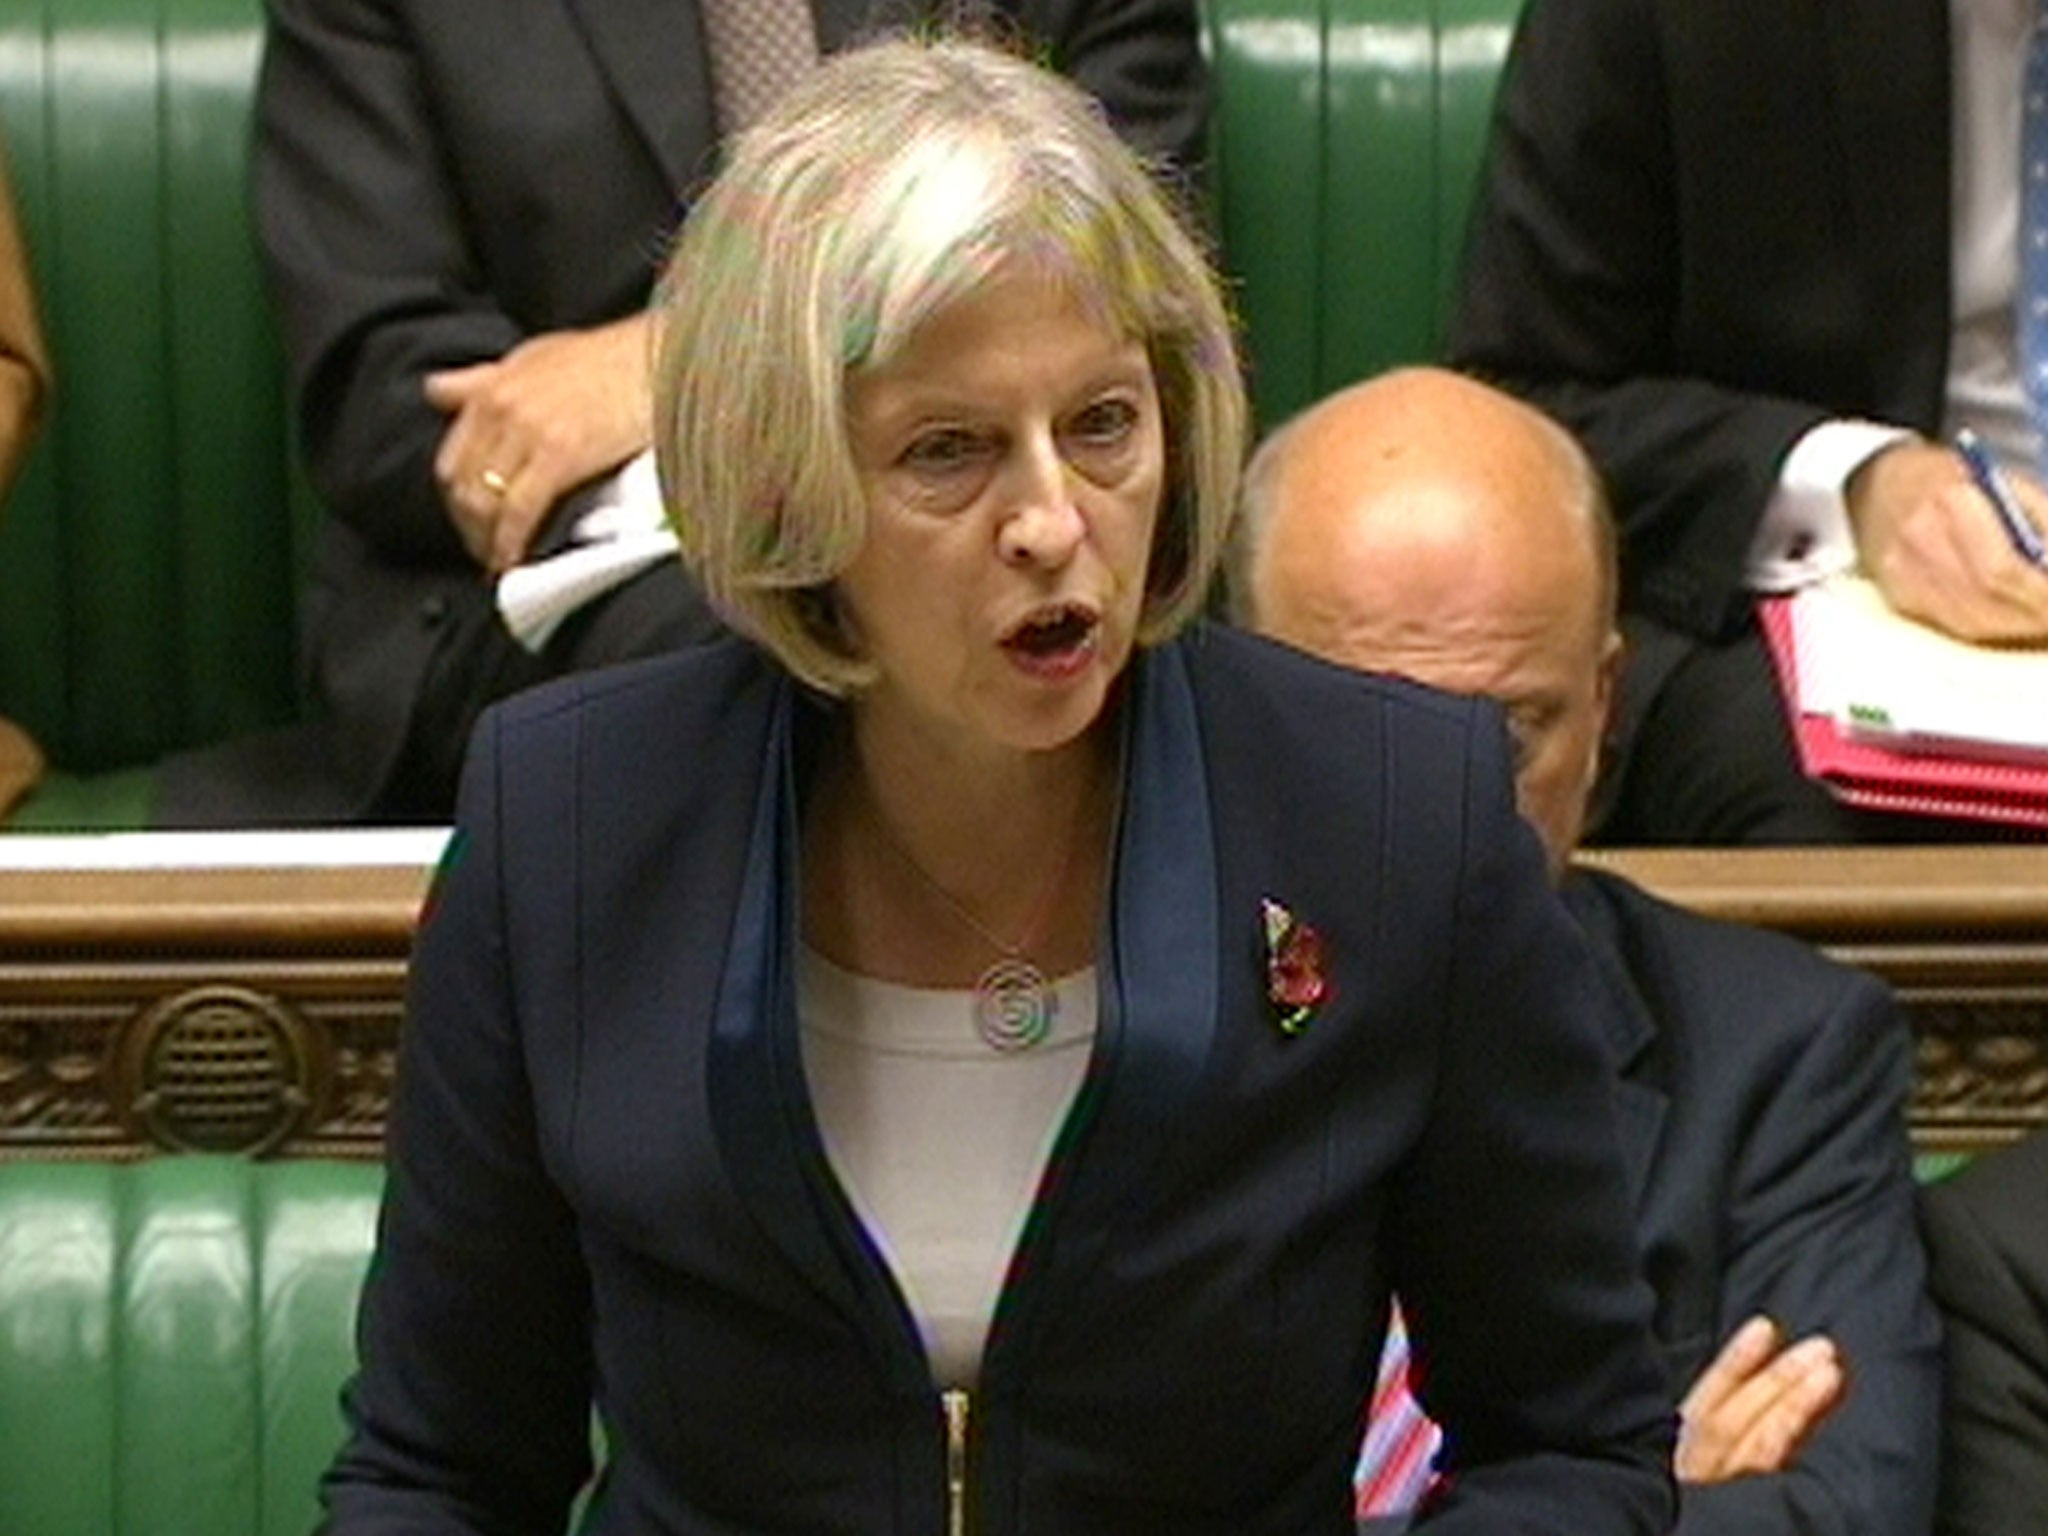 Home Secretary Theresa May makes a statement on the inquiry into historical child sexual abuse in the House of Commons